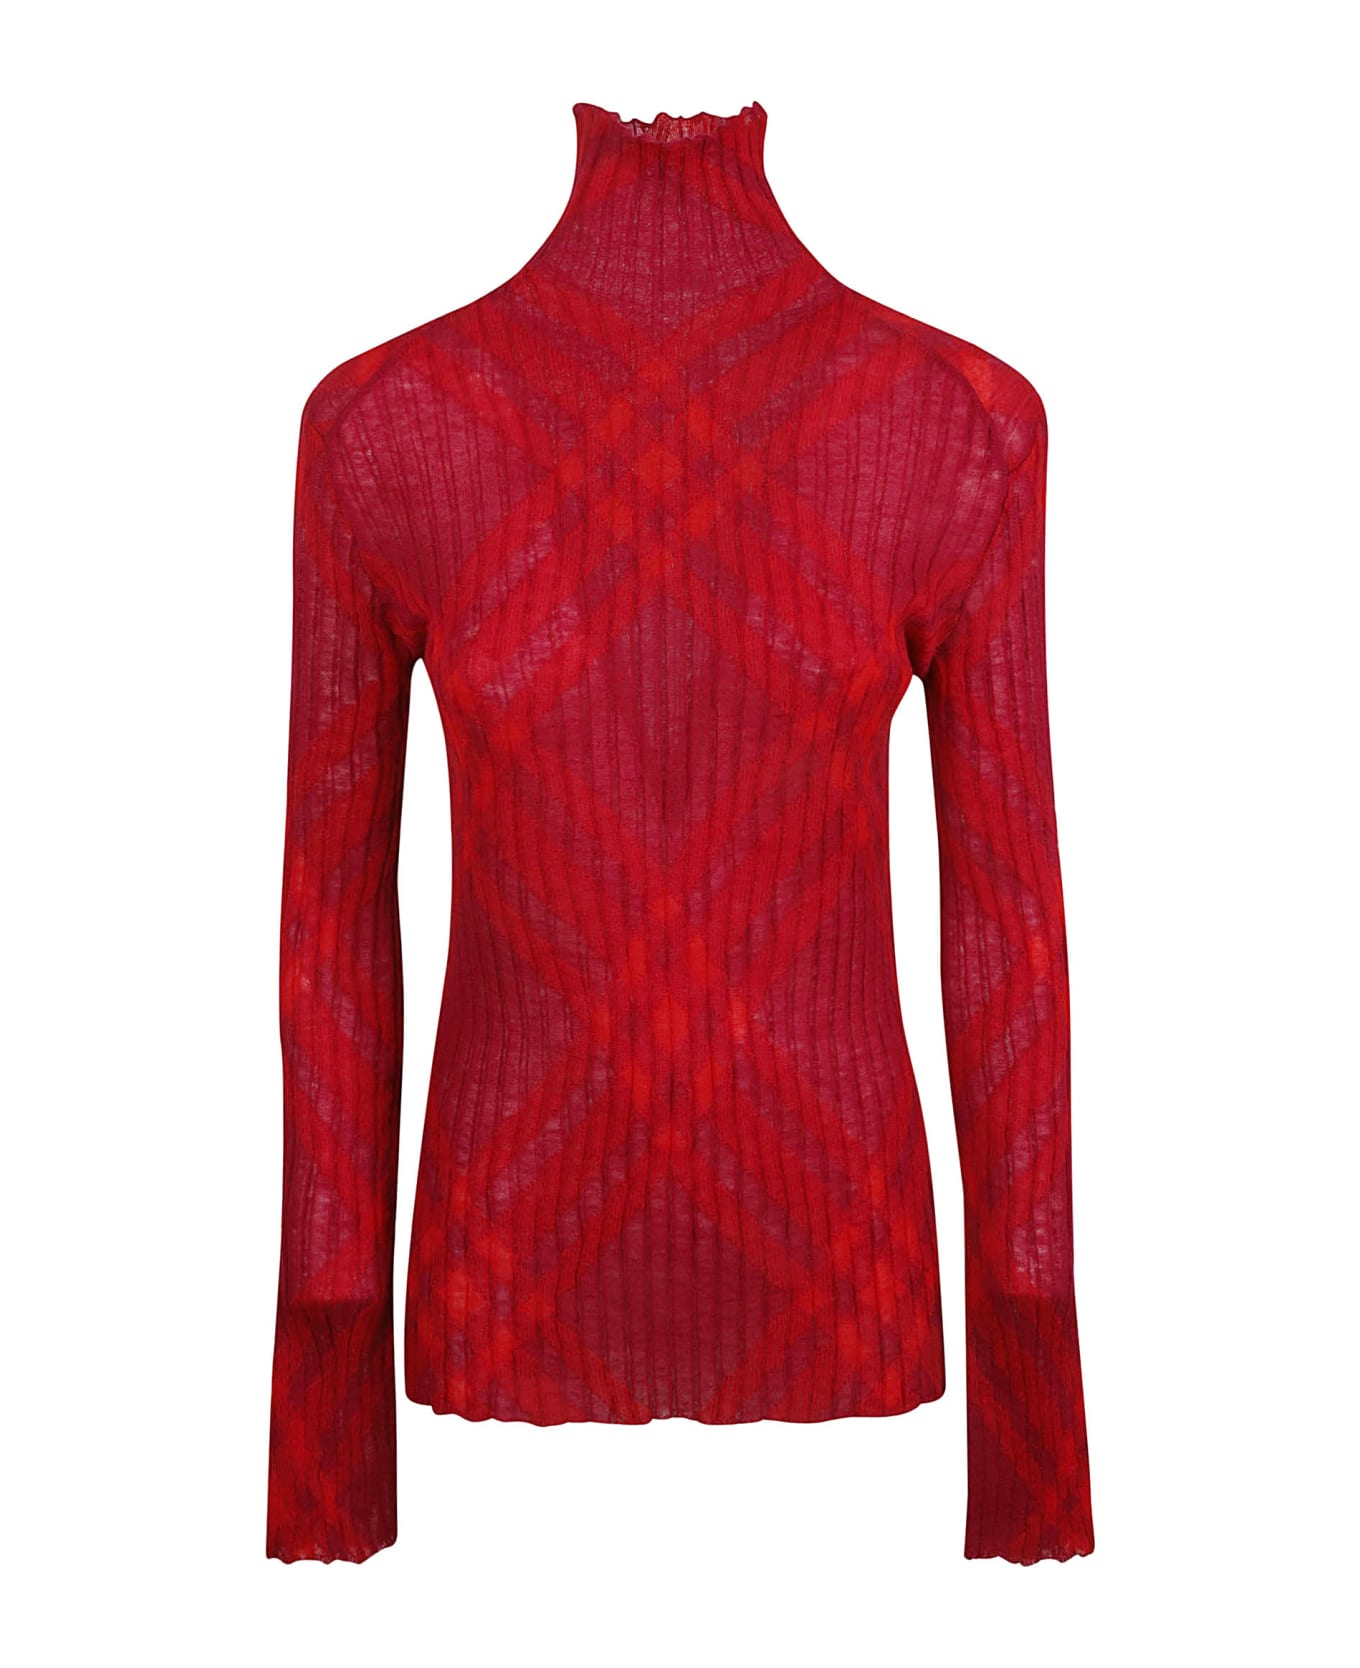 Burberry Ribbed Printed Jumper - Ripple Ip Check